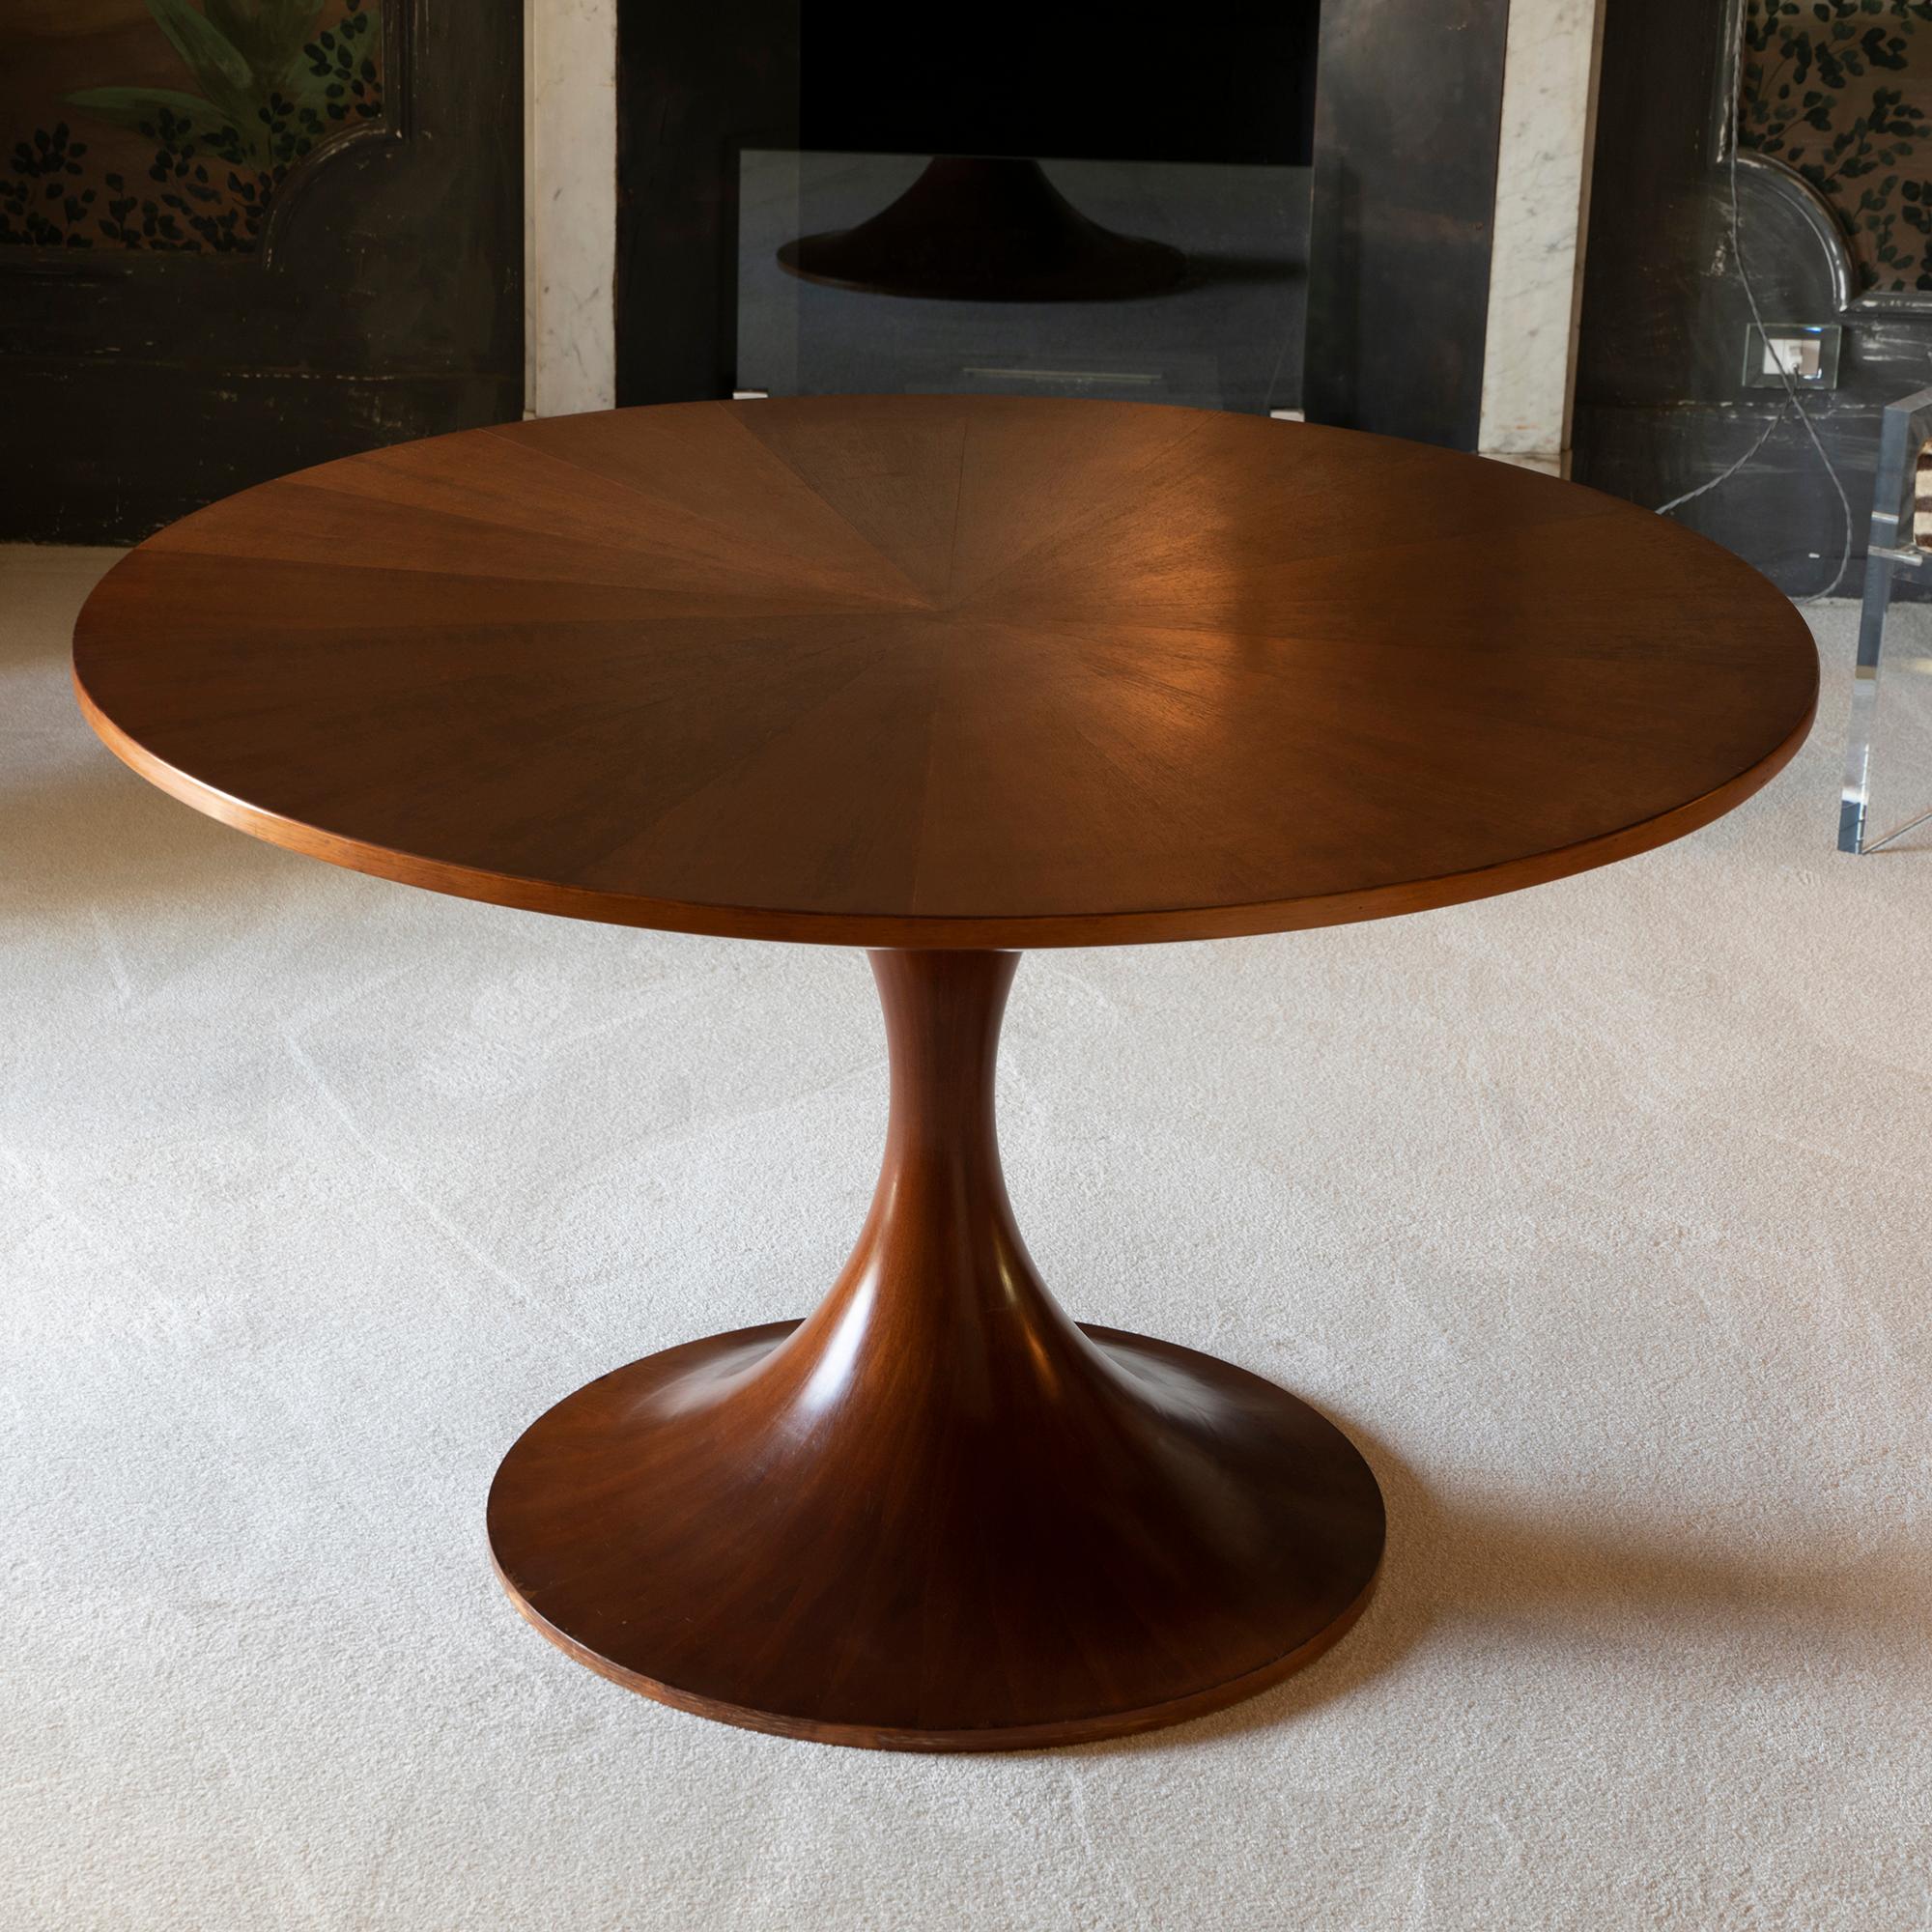 1960s Italian table, round walnut top with inlaid pattern, top it is screwed onto its tulip-shaped base.